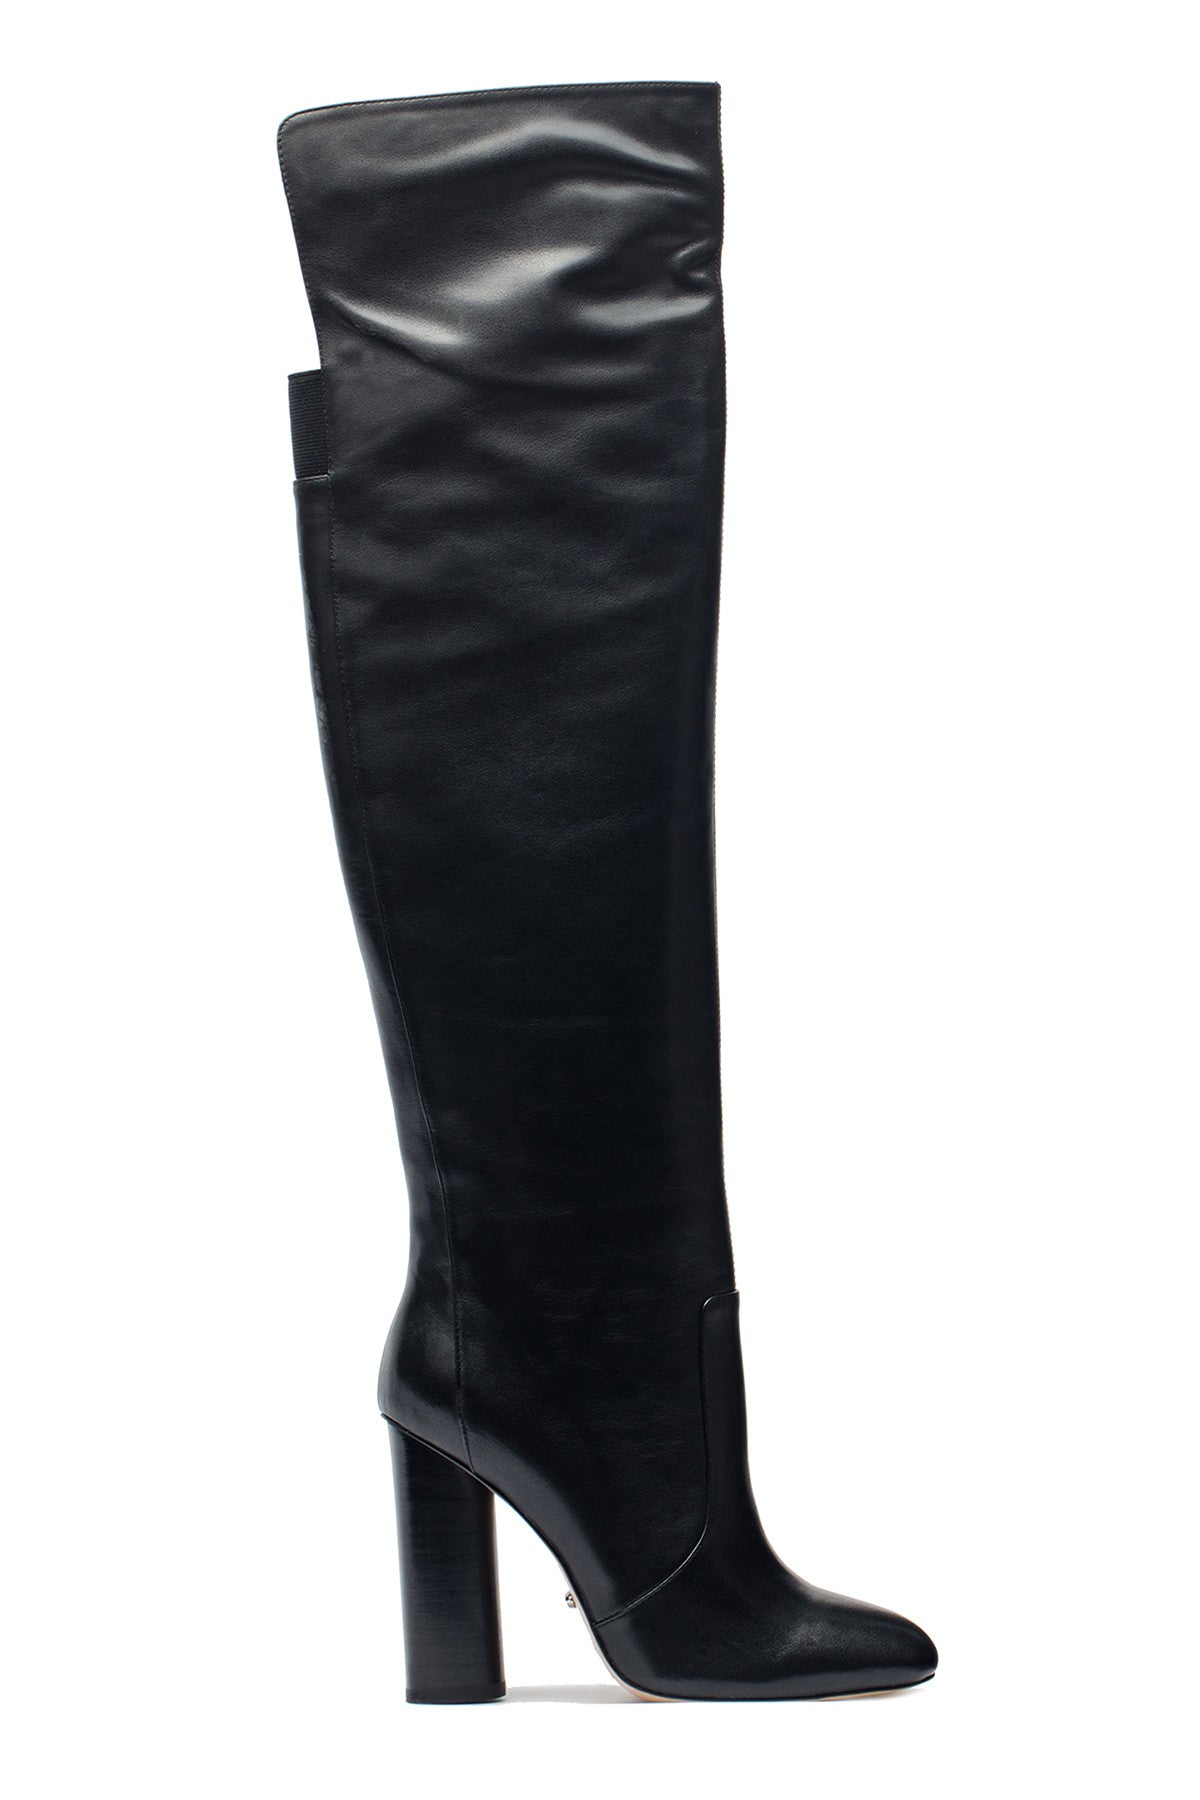 Over The Knee Leather Boots - AVHEELS